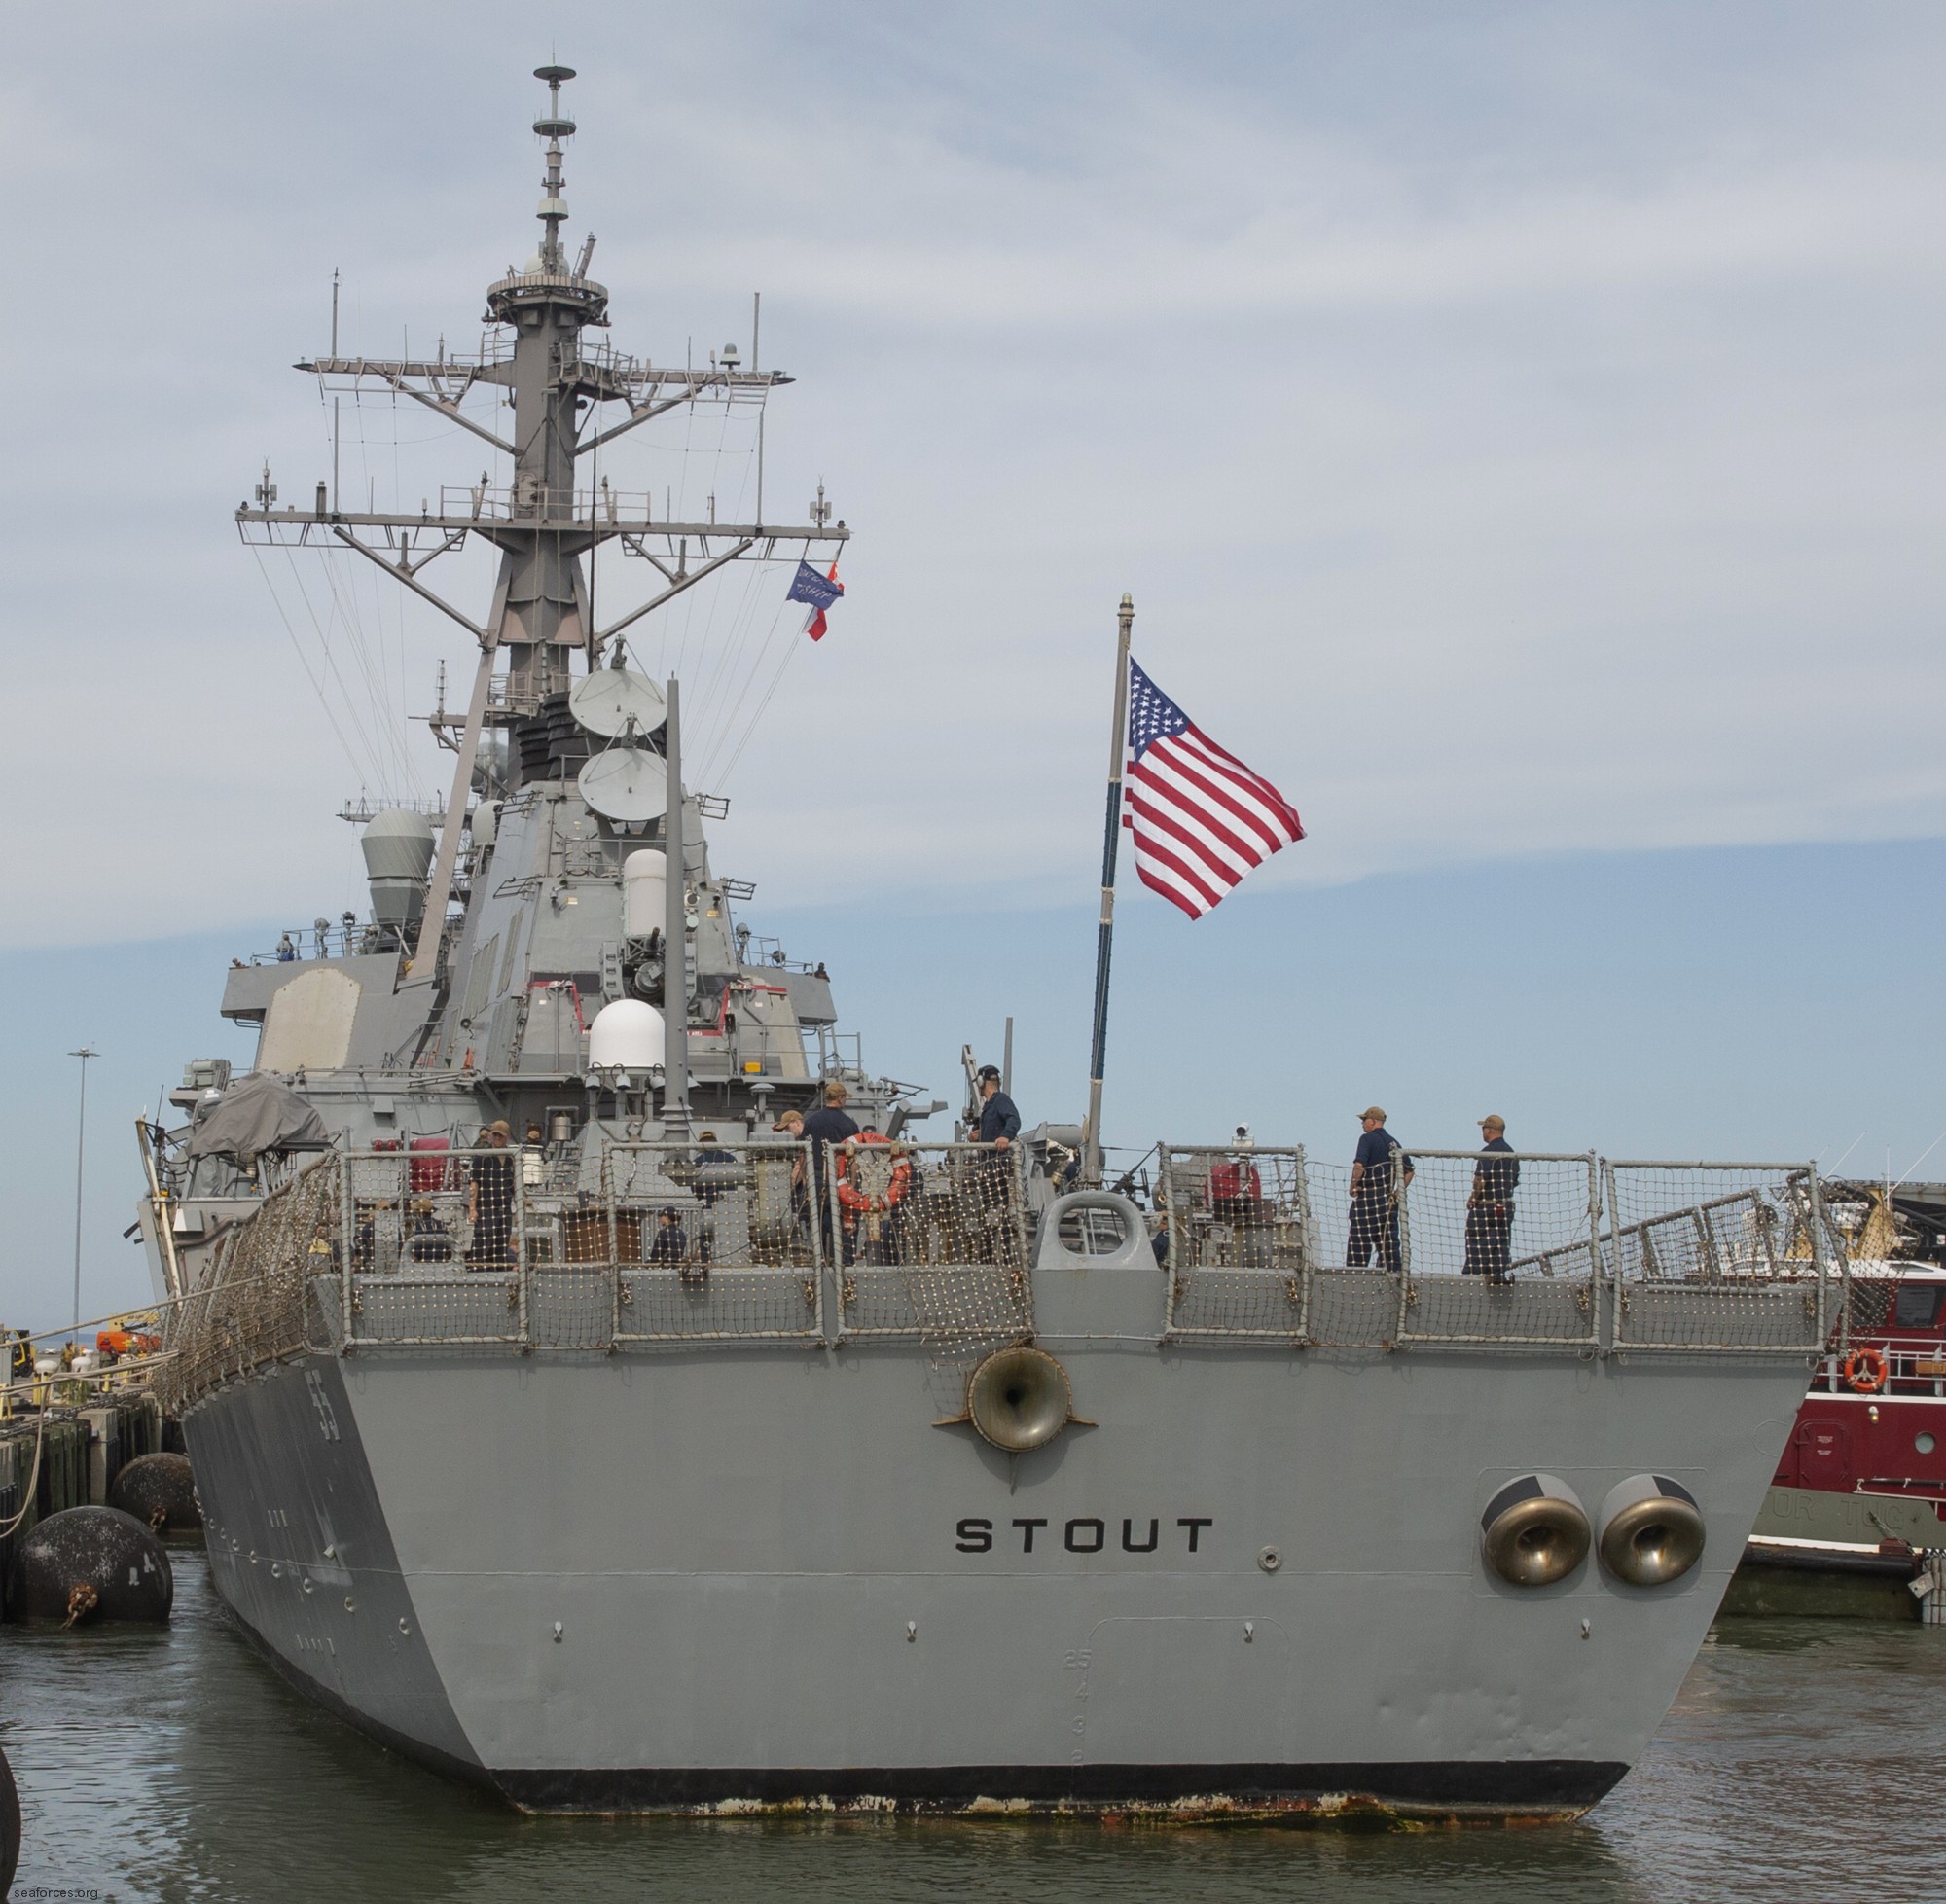 ddg-55 uss stout arleigh burke class guided missile destroyer us navy 100 naval station norfolk virginia